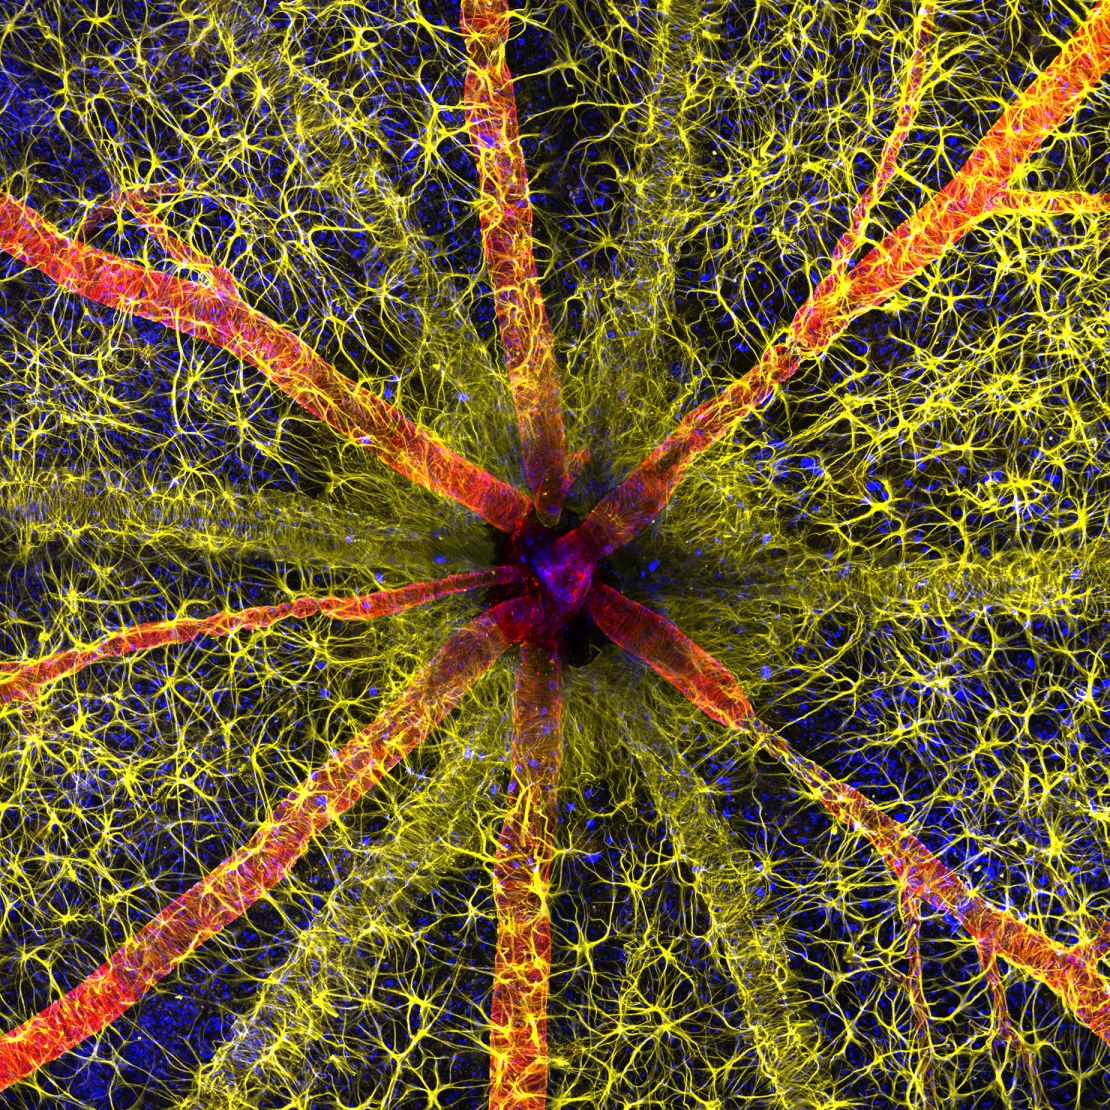 Diabetes researcher Hassanain Qambari, assisted by Jayden Dickson, captured the optic nerve head of a rodent in a web of color.